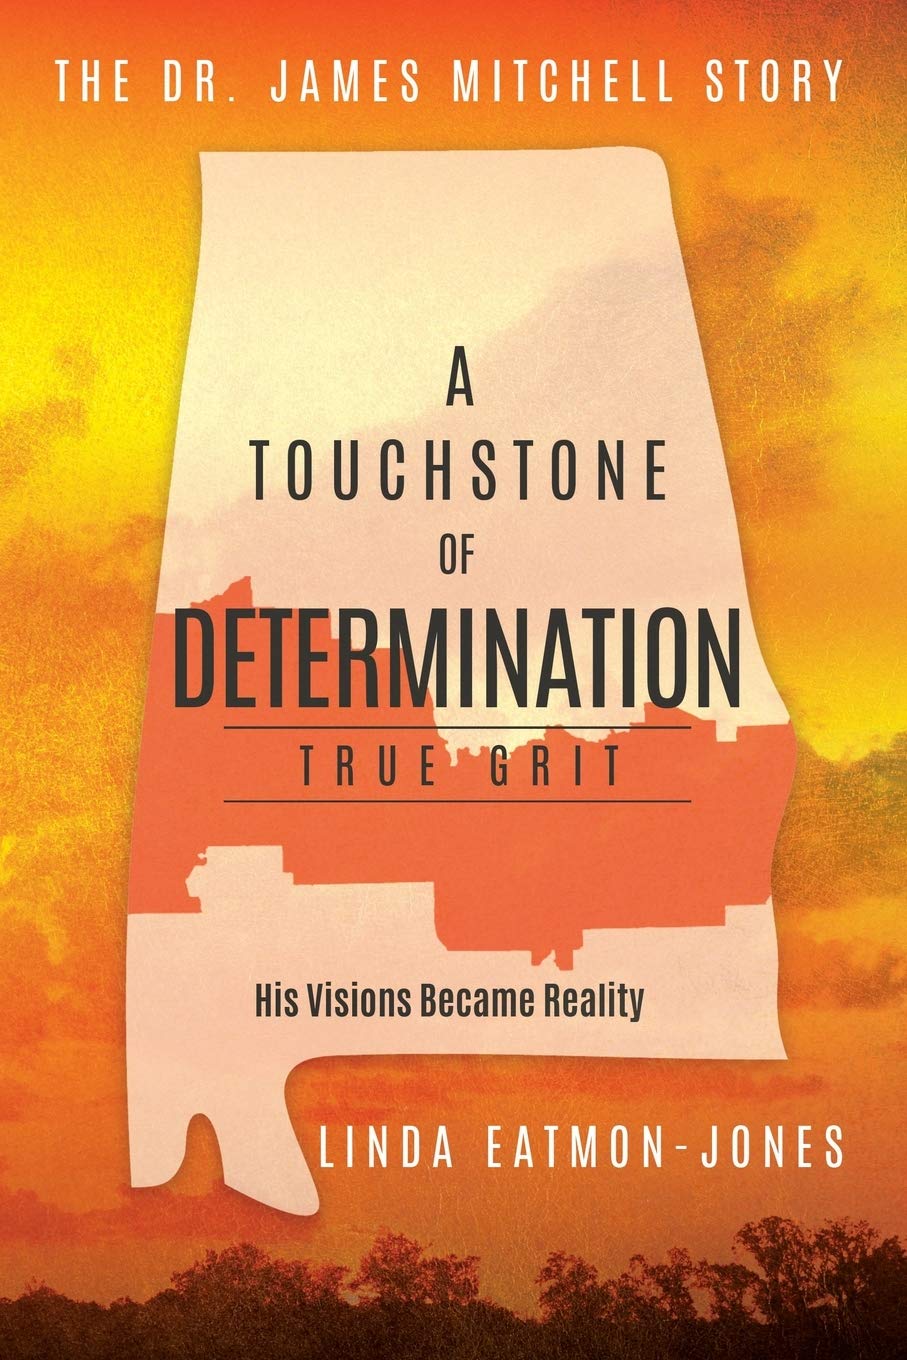 Tocuhstone of determination